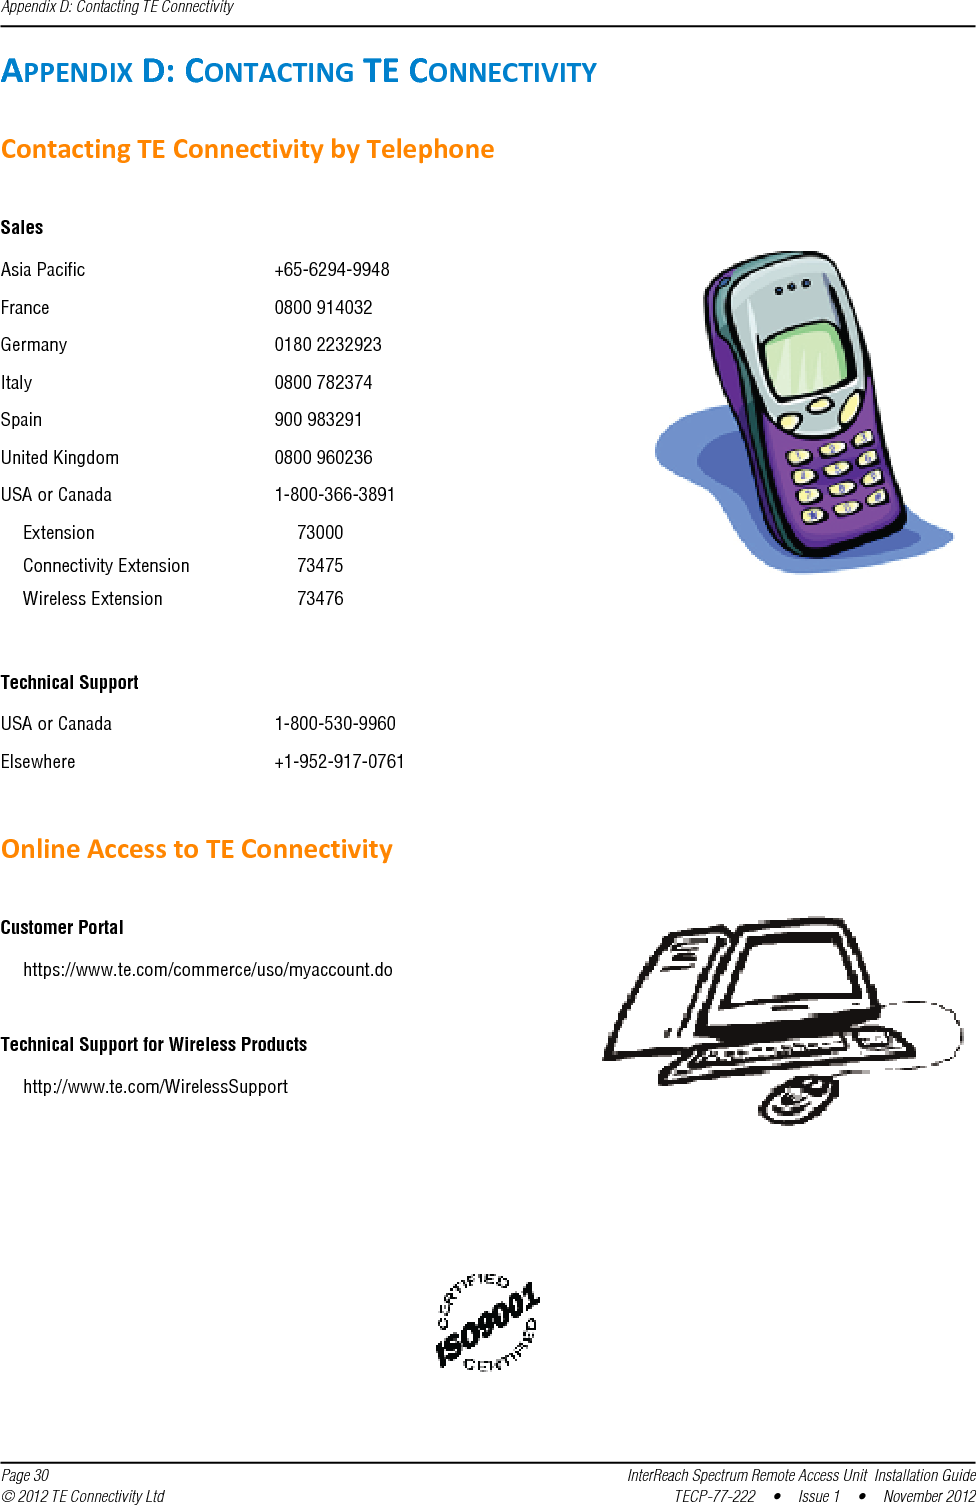 Appendix D: Contacting TE Connectivity  Page 30 InterReach Spectrum Remote Access Unit  Installation Guide© 2012 TE Connectivity Ltd TECP-77-222  •  Issue 1  •  November 2012APPENDIXD:CONTACTINGTECONNECTIVITYContactingTEConnectivitybyTelephoneSalesAsia Pacific +65-6294-9948France 0800 914032Germany 0180 2232923Italy 0800 782374Spain 900 983291United Kingdom 0800 960236USA or Canada 1-800-366-3891Extension 73000Connectivity Extension 73475Wireless Extension 73476Technical SupportUSA or Canada 1-800-530-9960Elsewhere +1-952-917-0761OnlineAccesstoTEConnectivityCustomer Portalhttps://www.te.com/commerce/uso/myaccount.doTechnical Support for Wireless Productshttp://www.te.com/WirelessSupport 